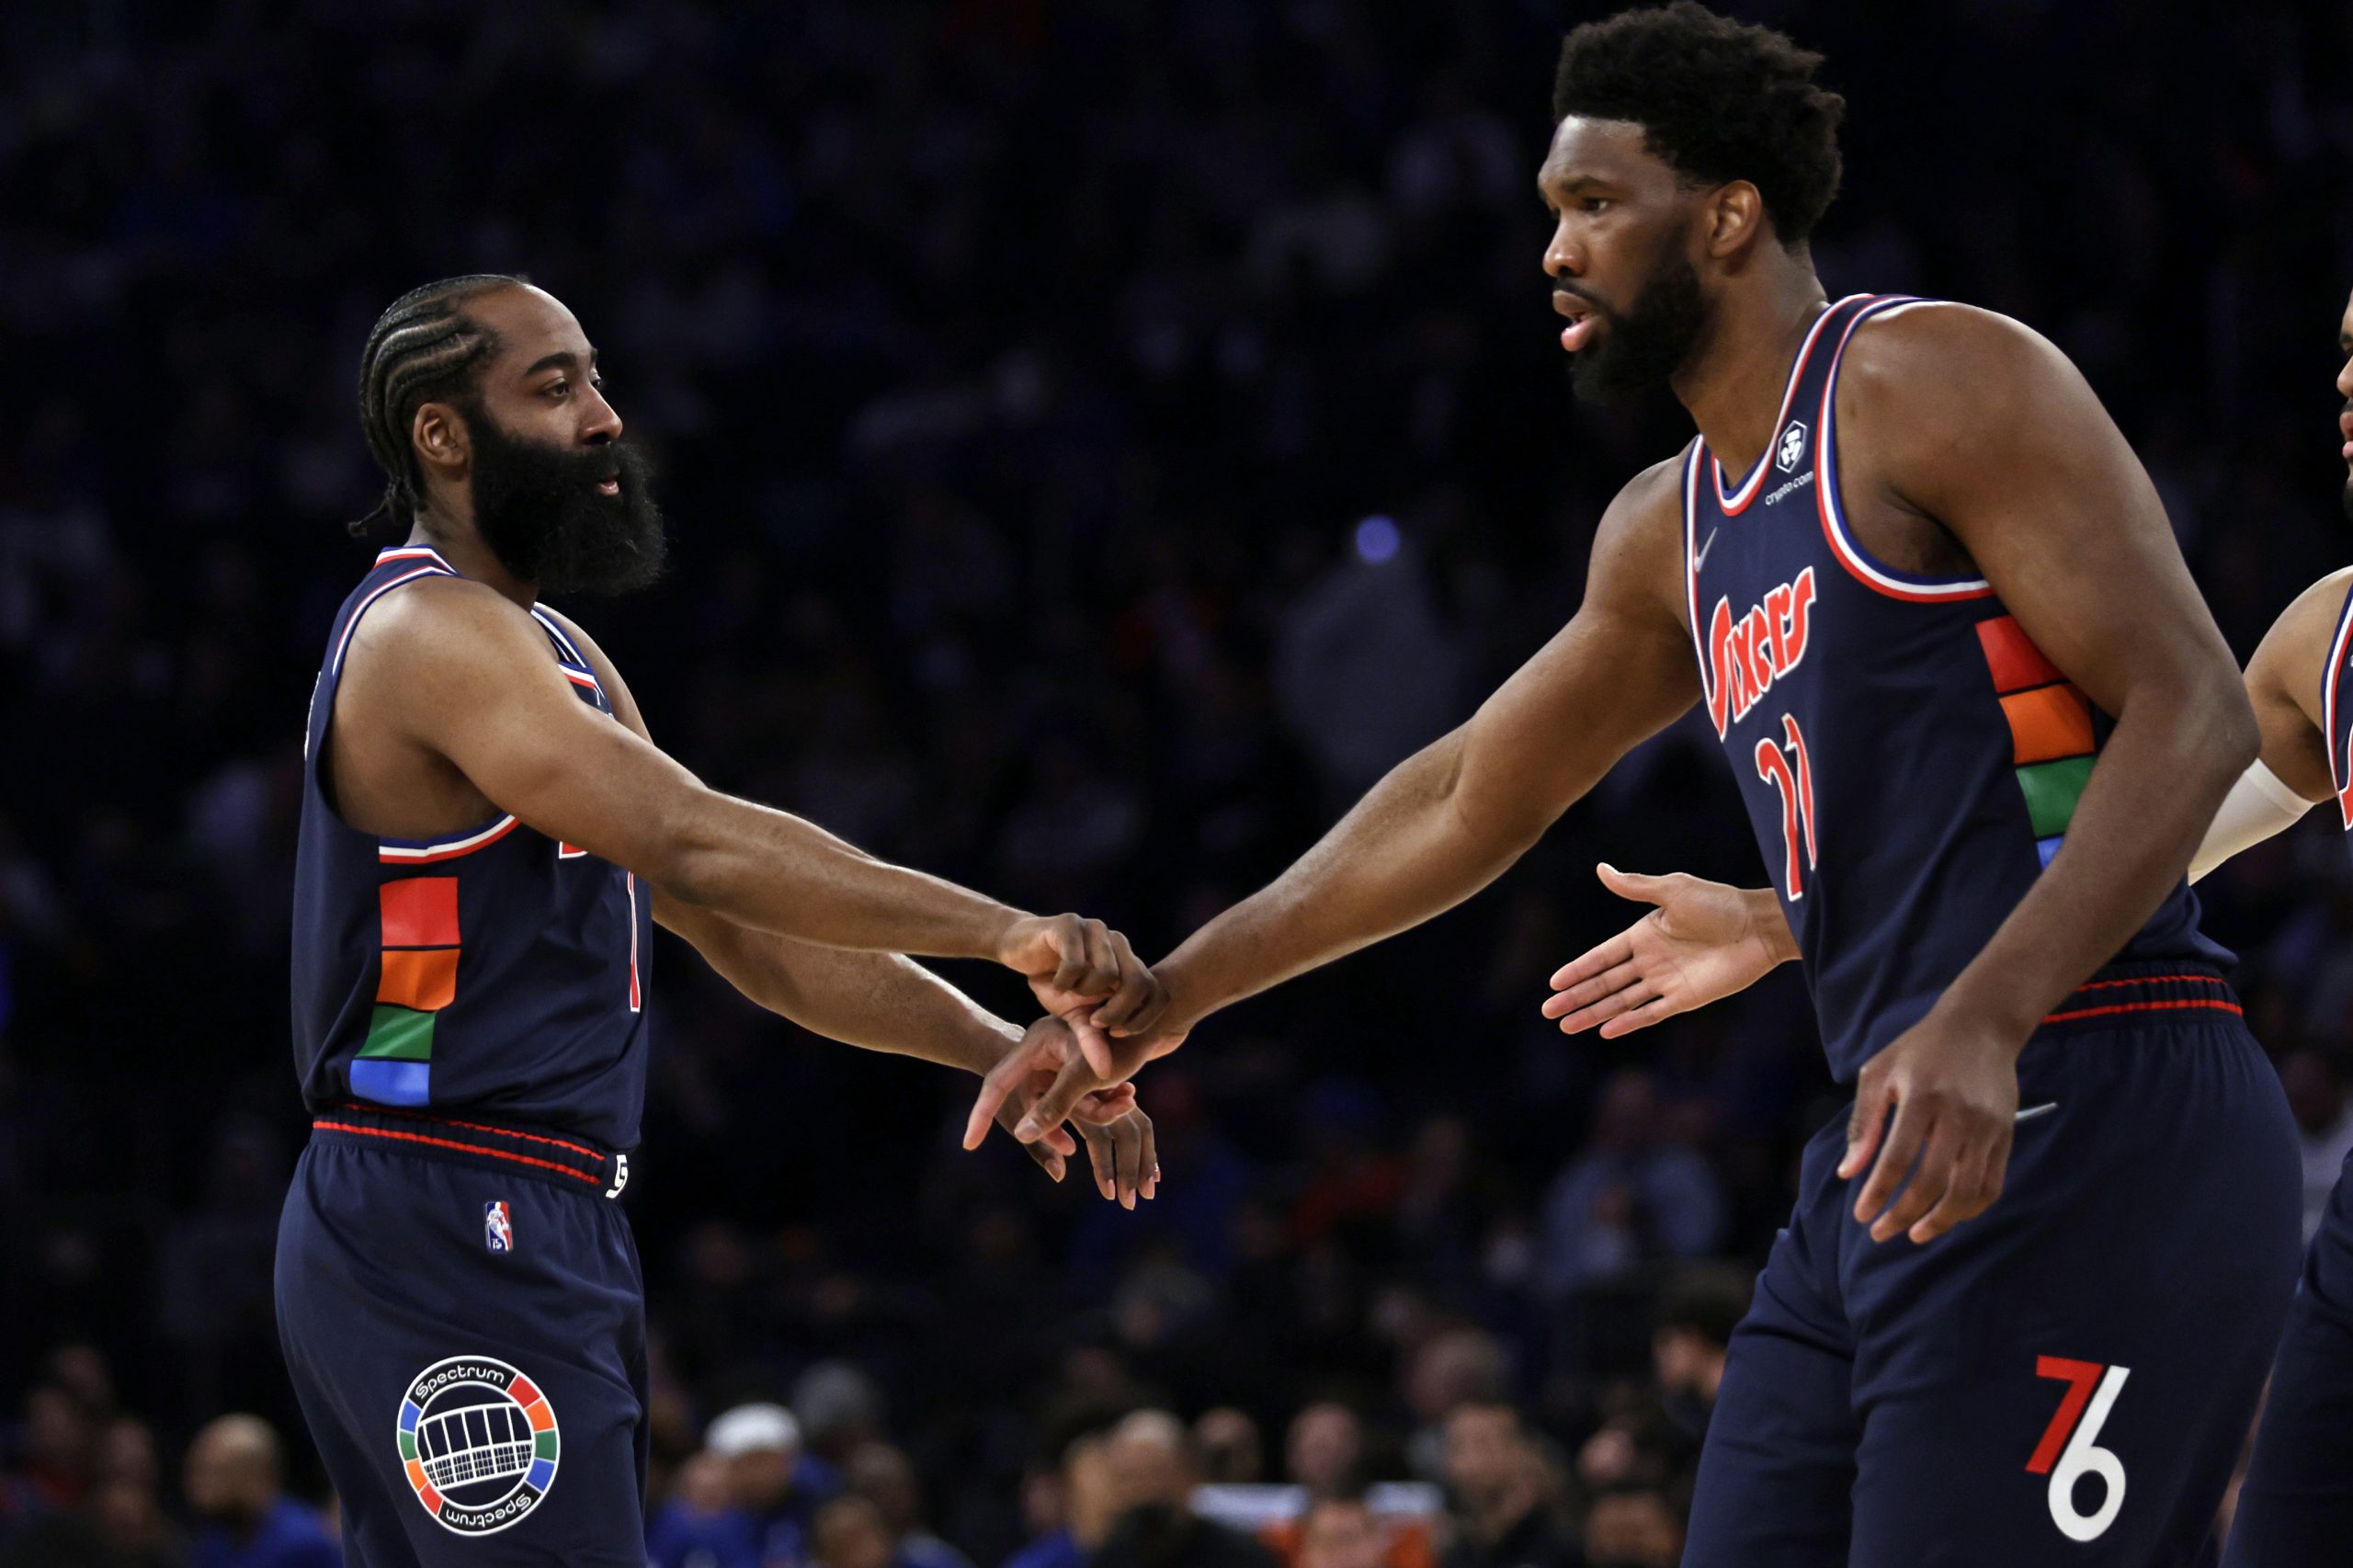 James Harden and Joel Embiid of the Sixers celebrate together